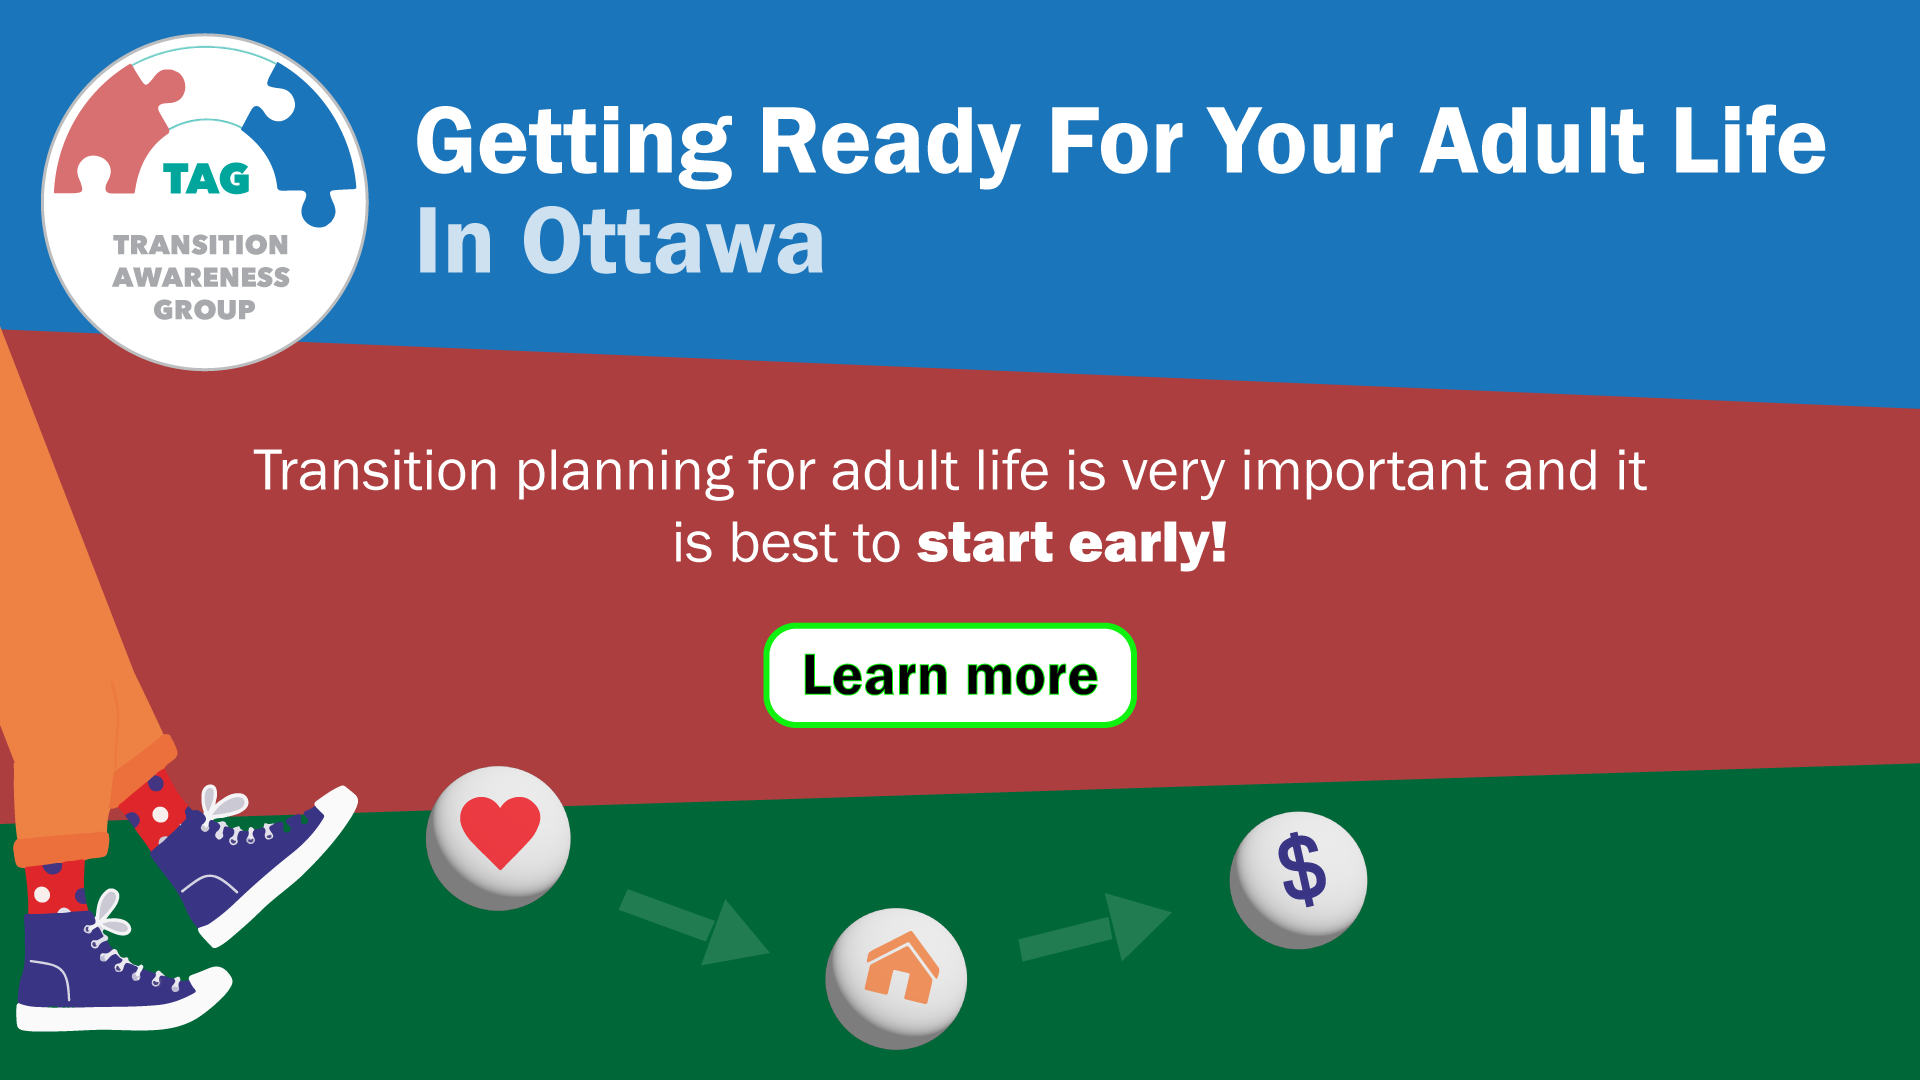 Transition planning for adult life is very important and it is best to start early! Learn more